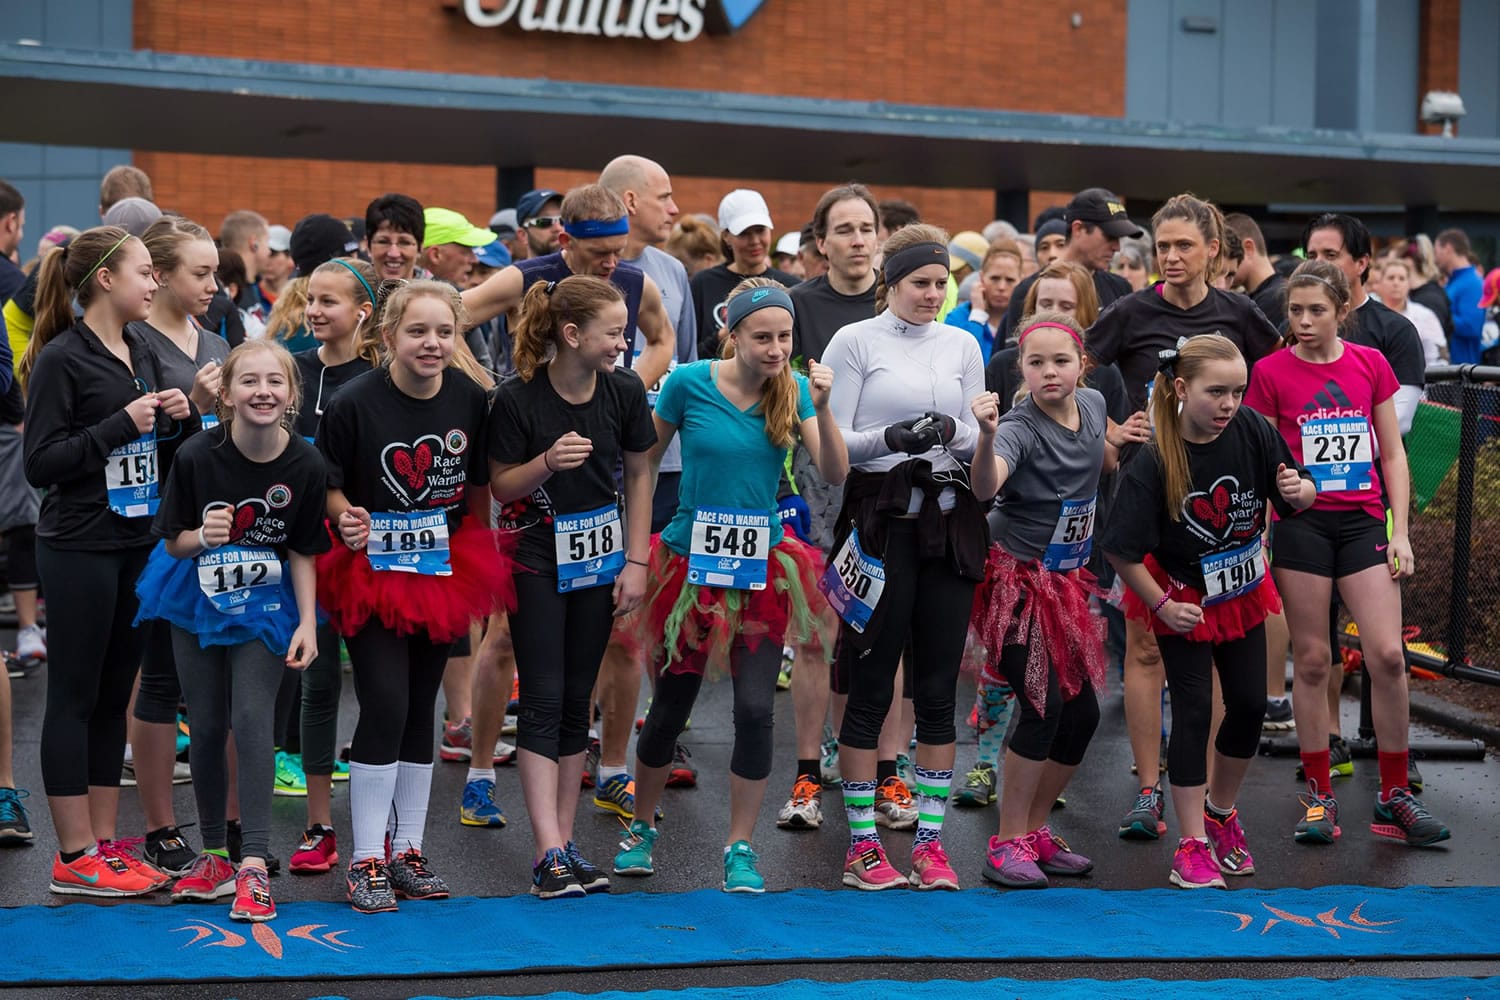 Last year, Clark Public Utilities raised about $19,000 for Operation Warm Heart through Race for Warmth.